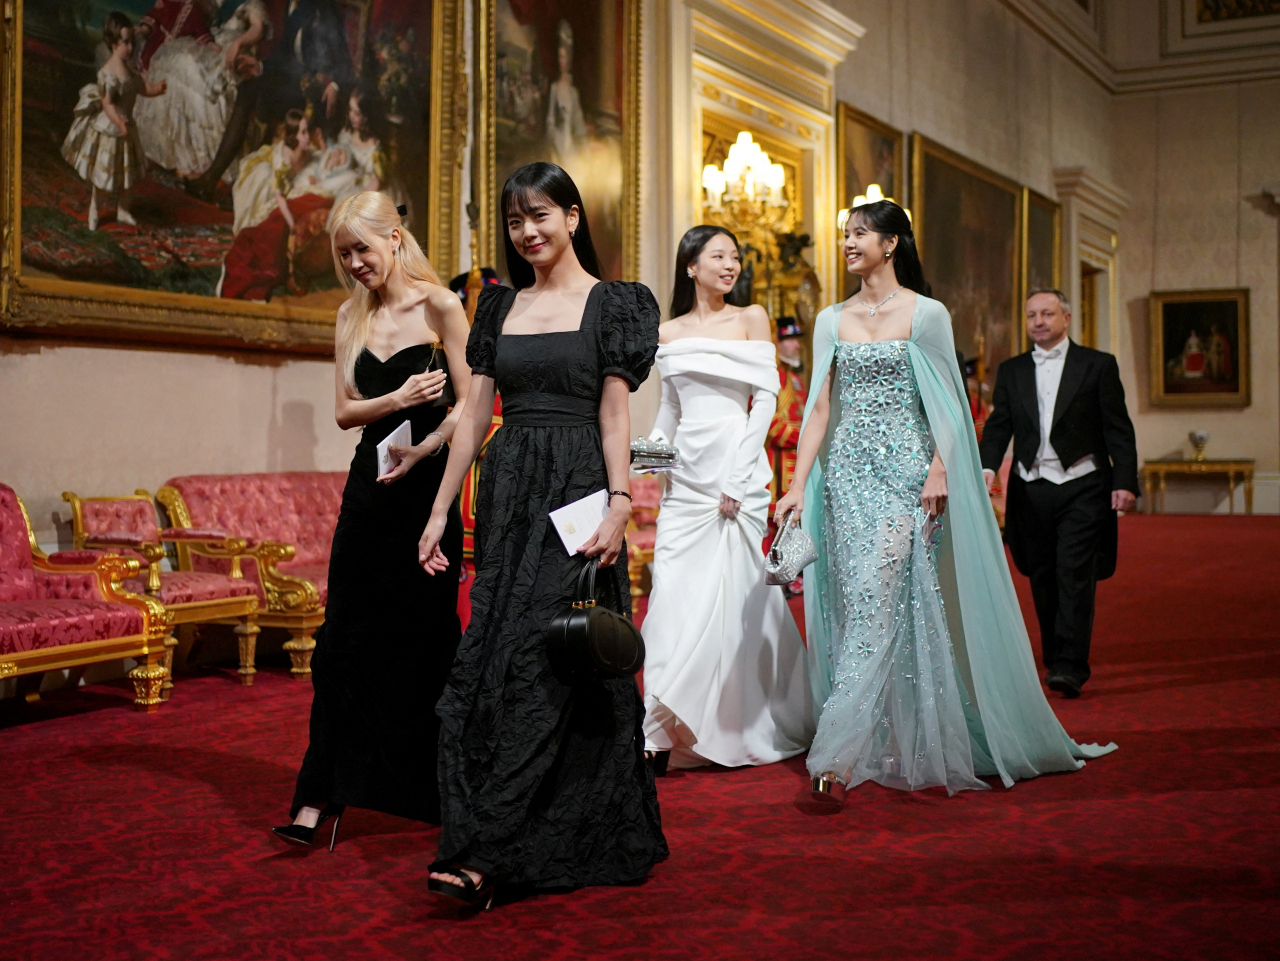 Members of the South Korean girl band Blackpink attend the State Banquet during the South Korean President's state visit at Buckingham Palace in London, Britain, on Tuesday. (Reuters-Yonhap)